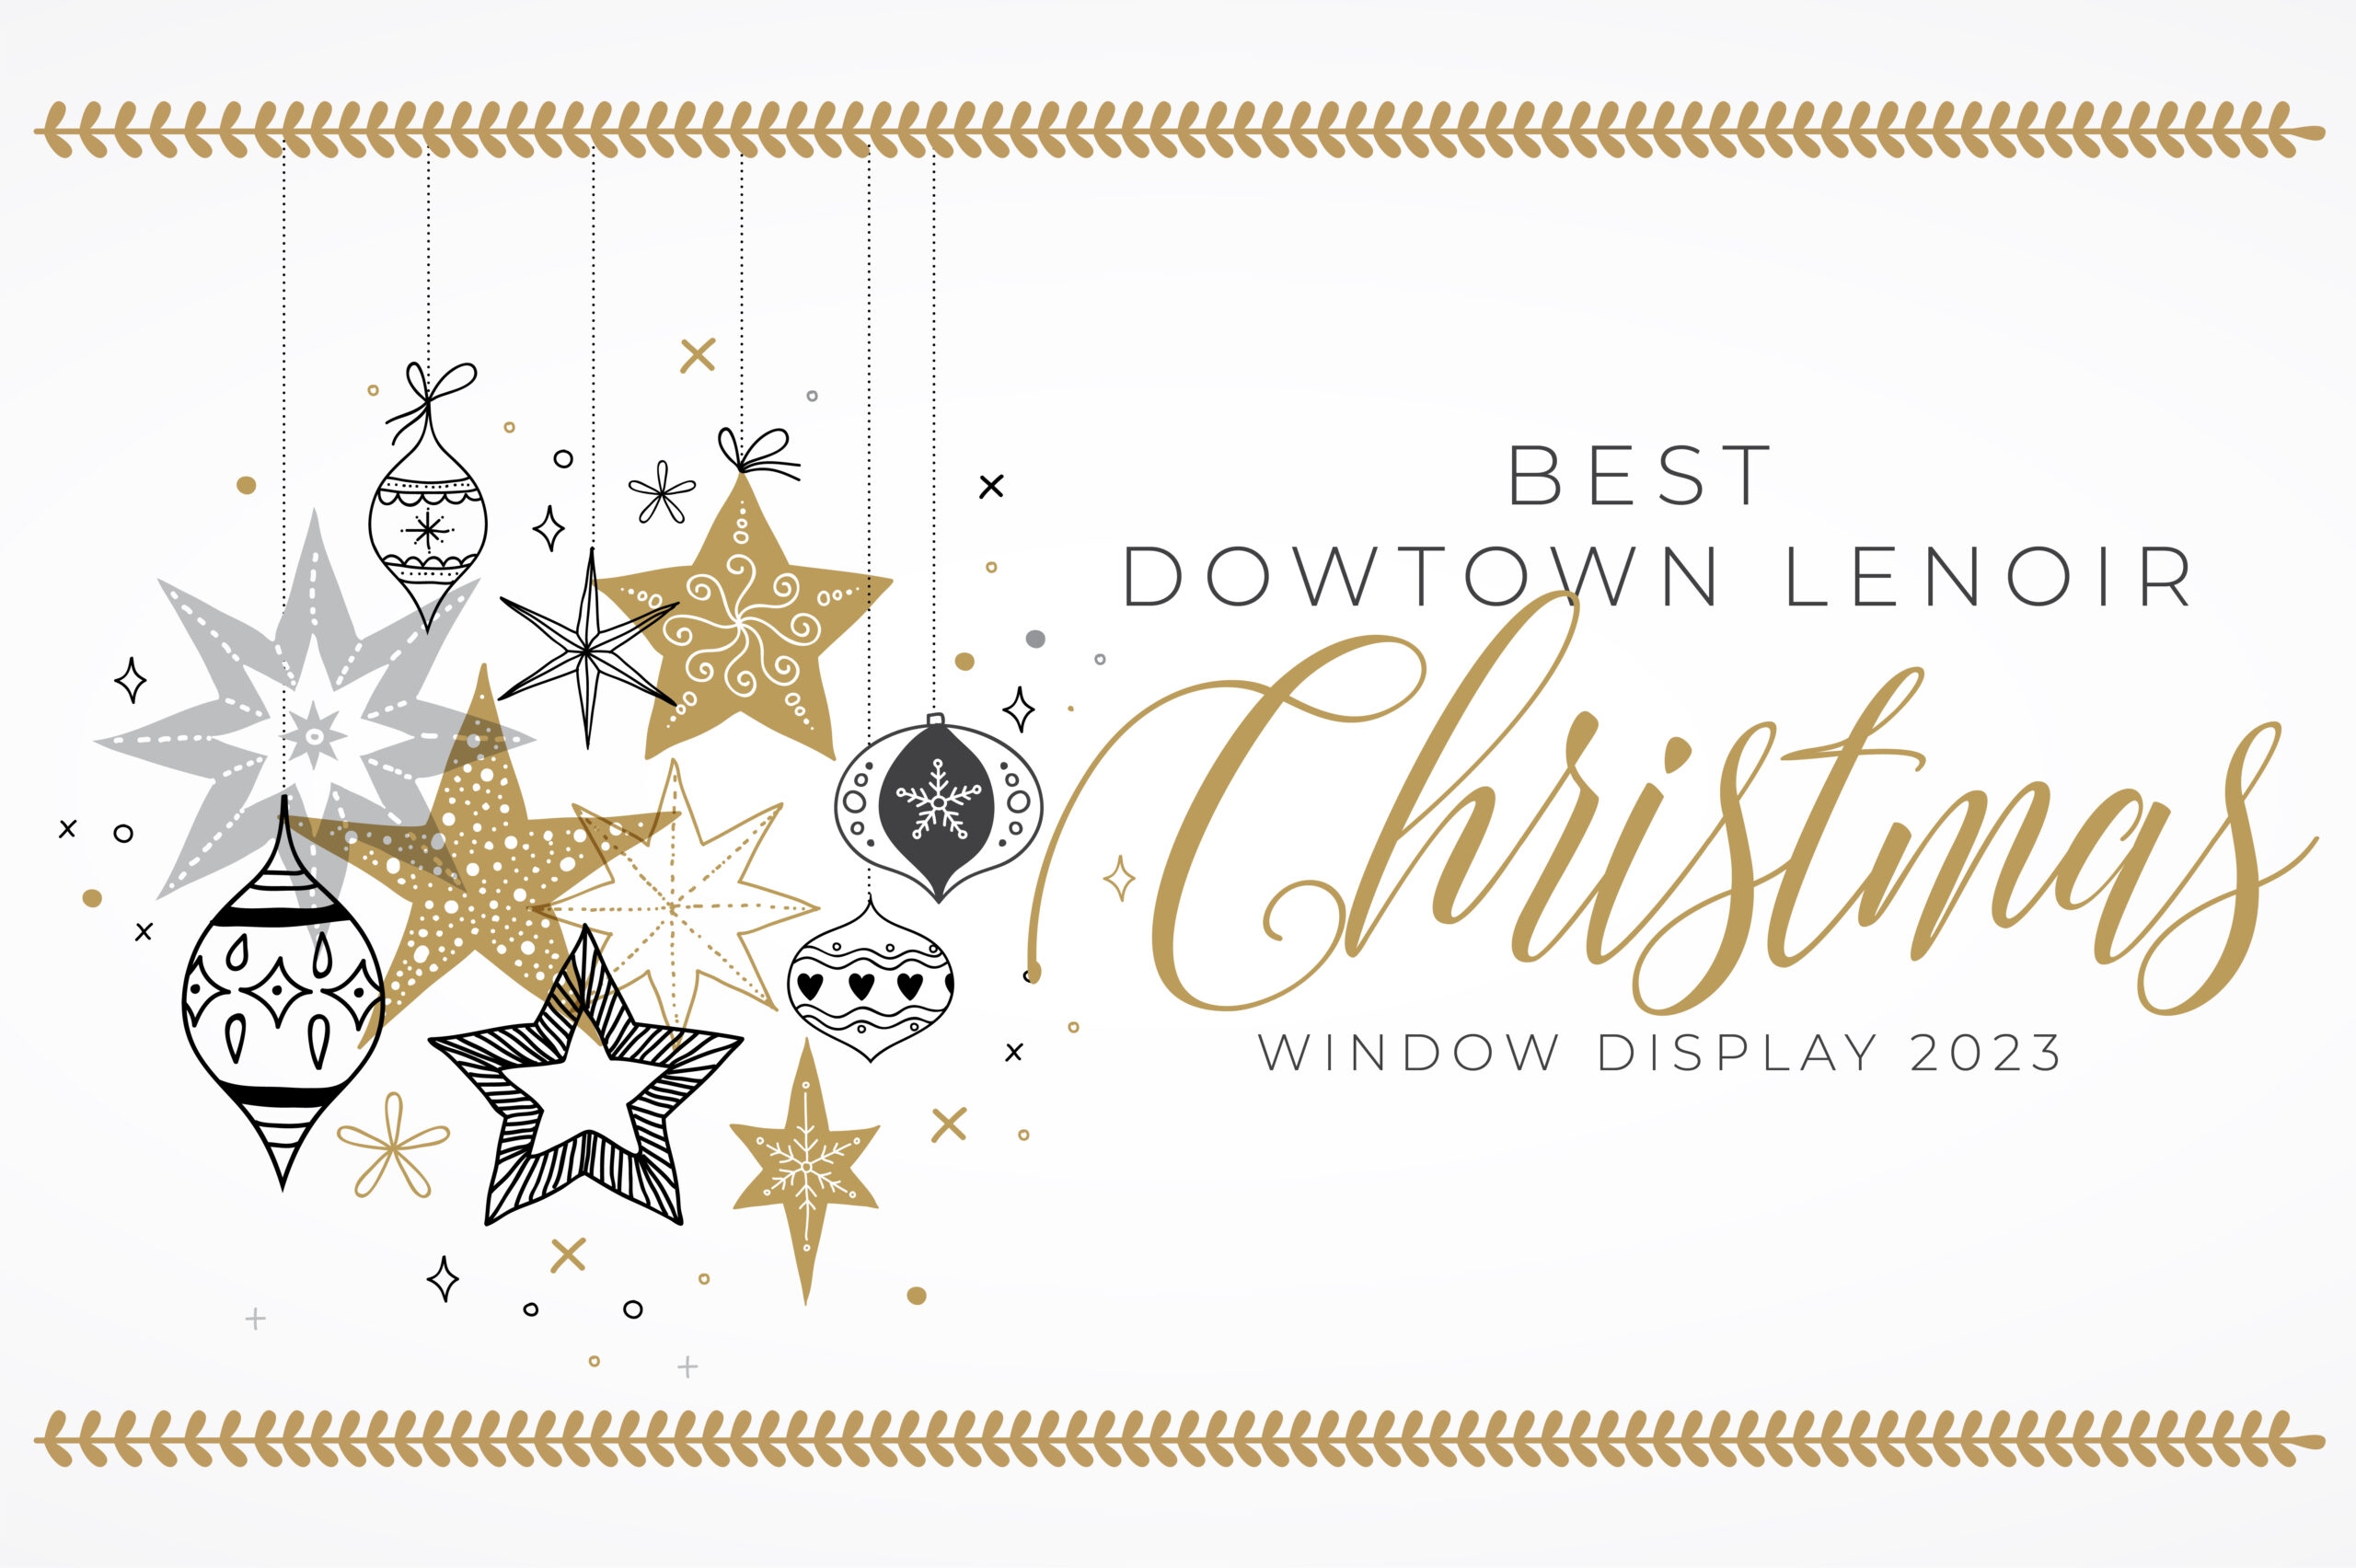 Downtown Christmas Window Display Competition